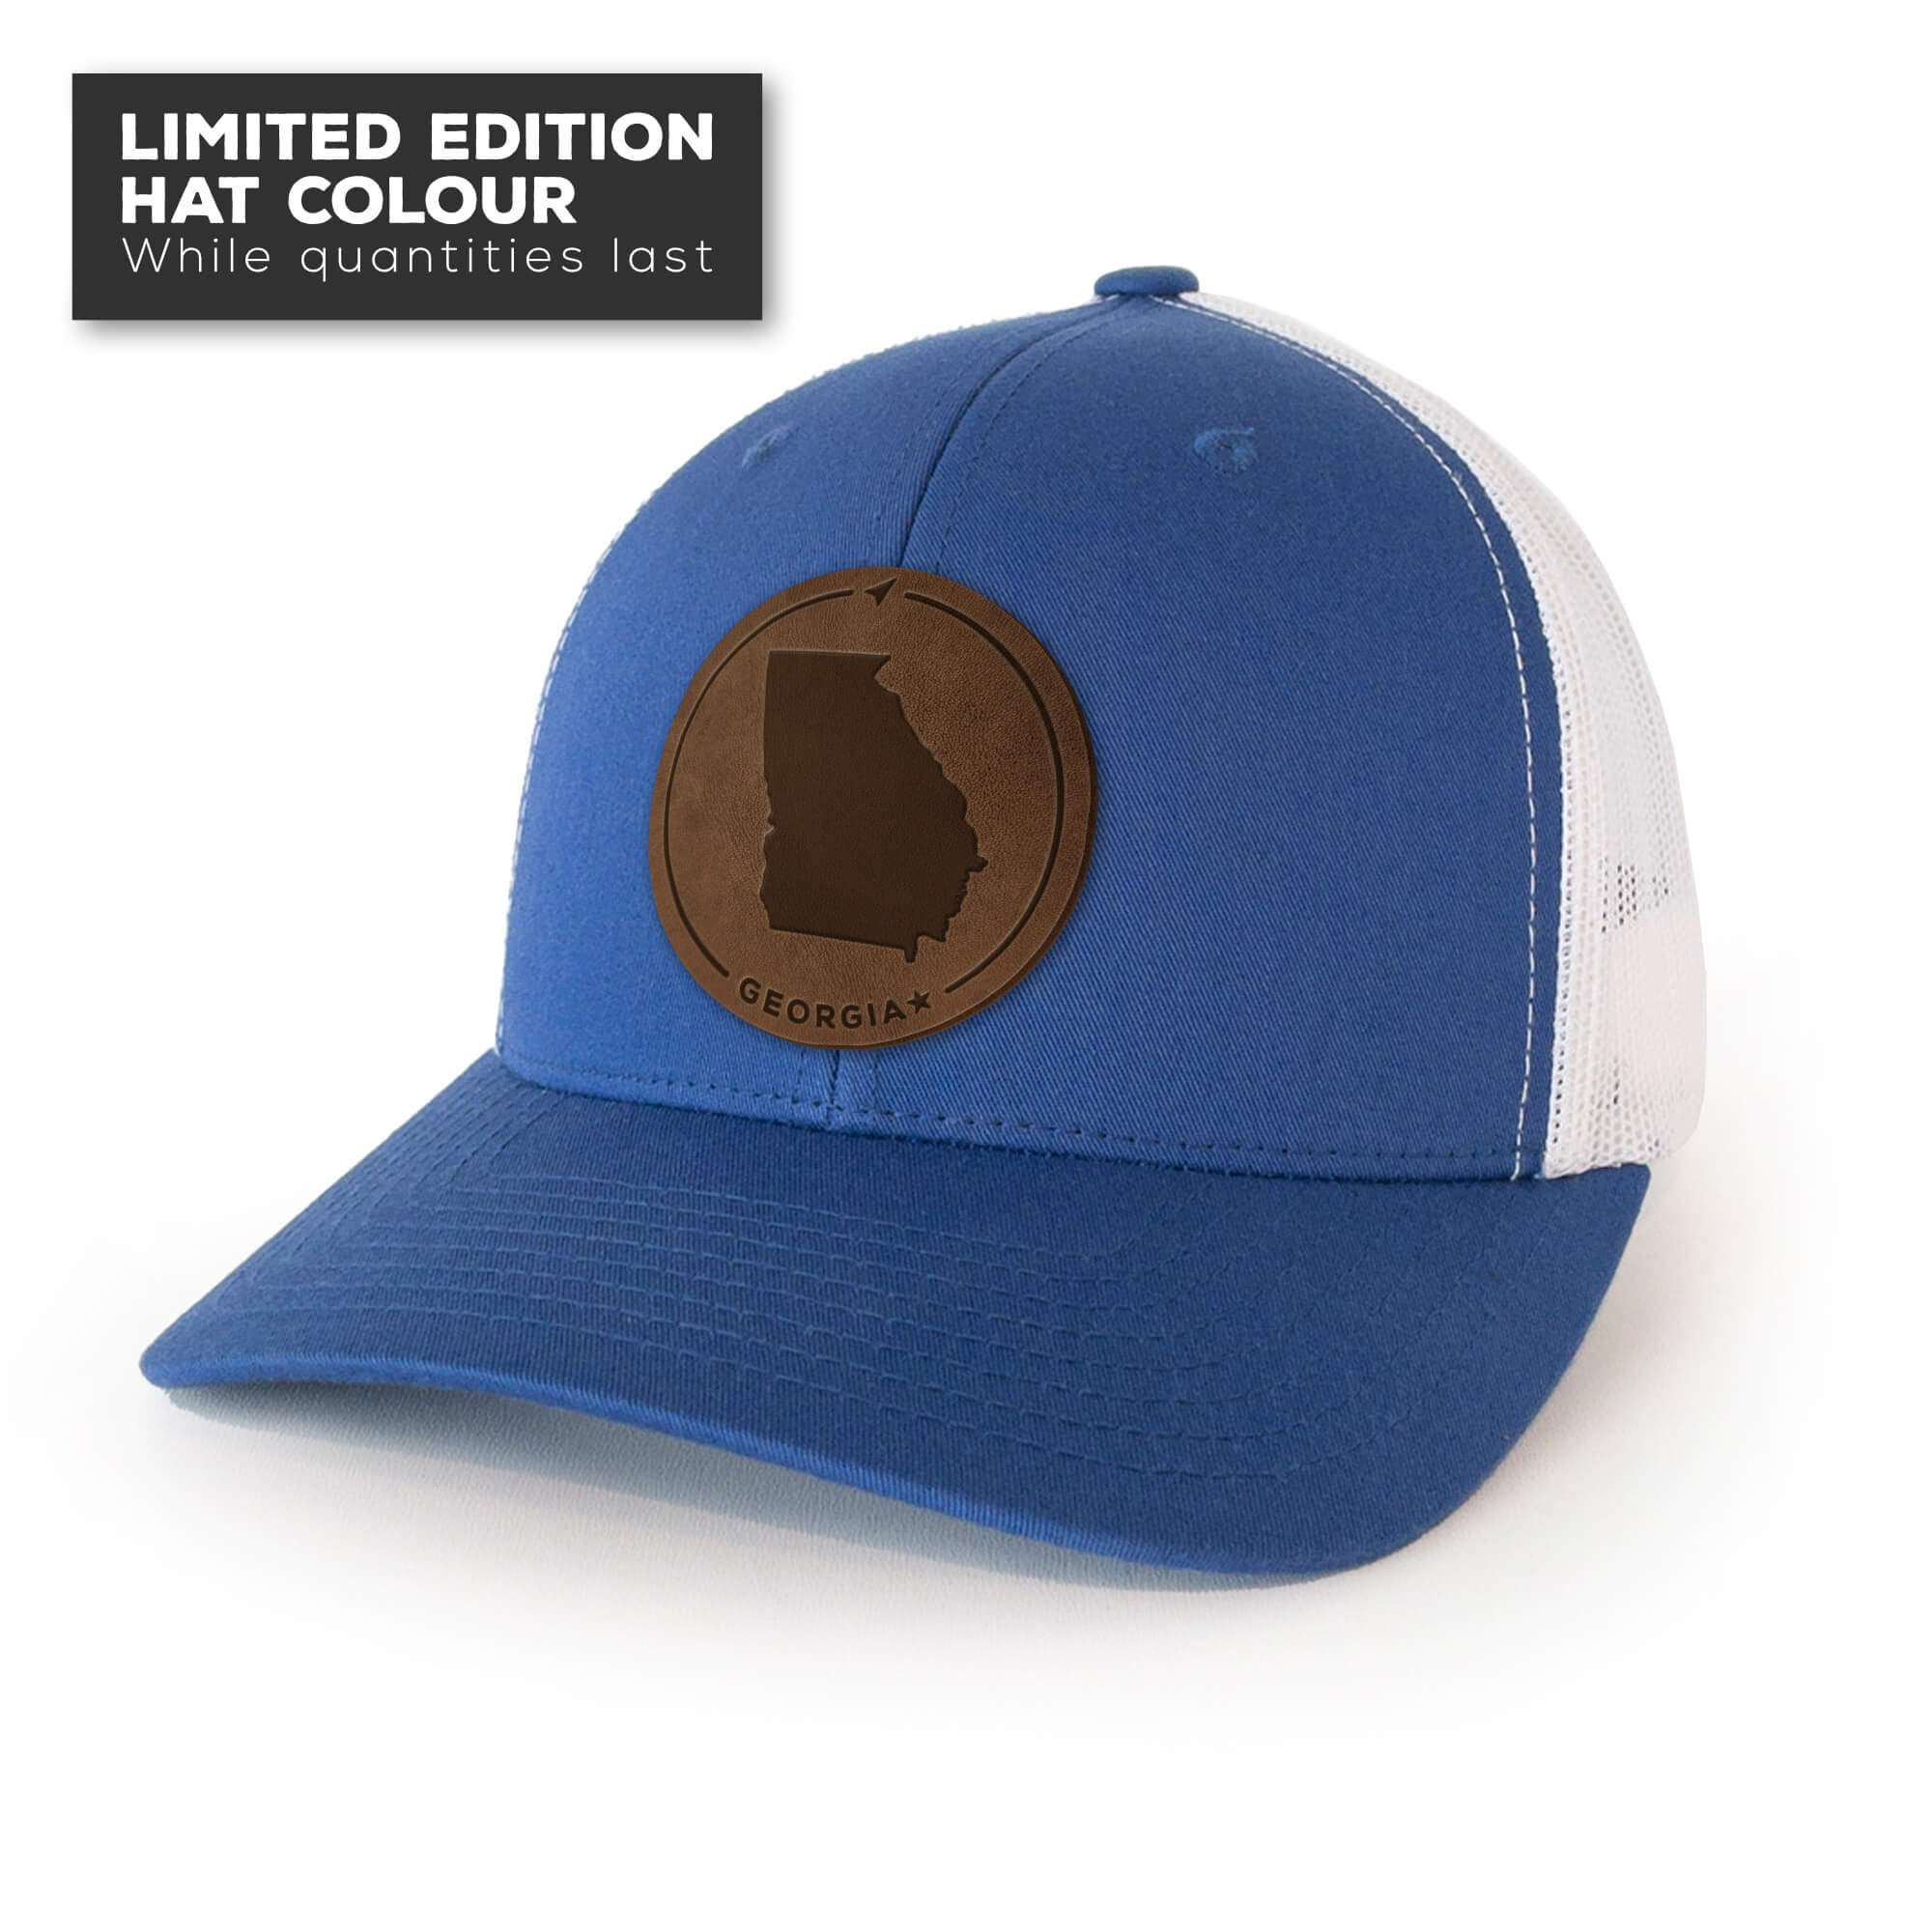 Royal Blue trucker hat with full-grain leather patch of Georgia